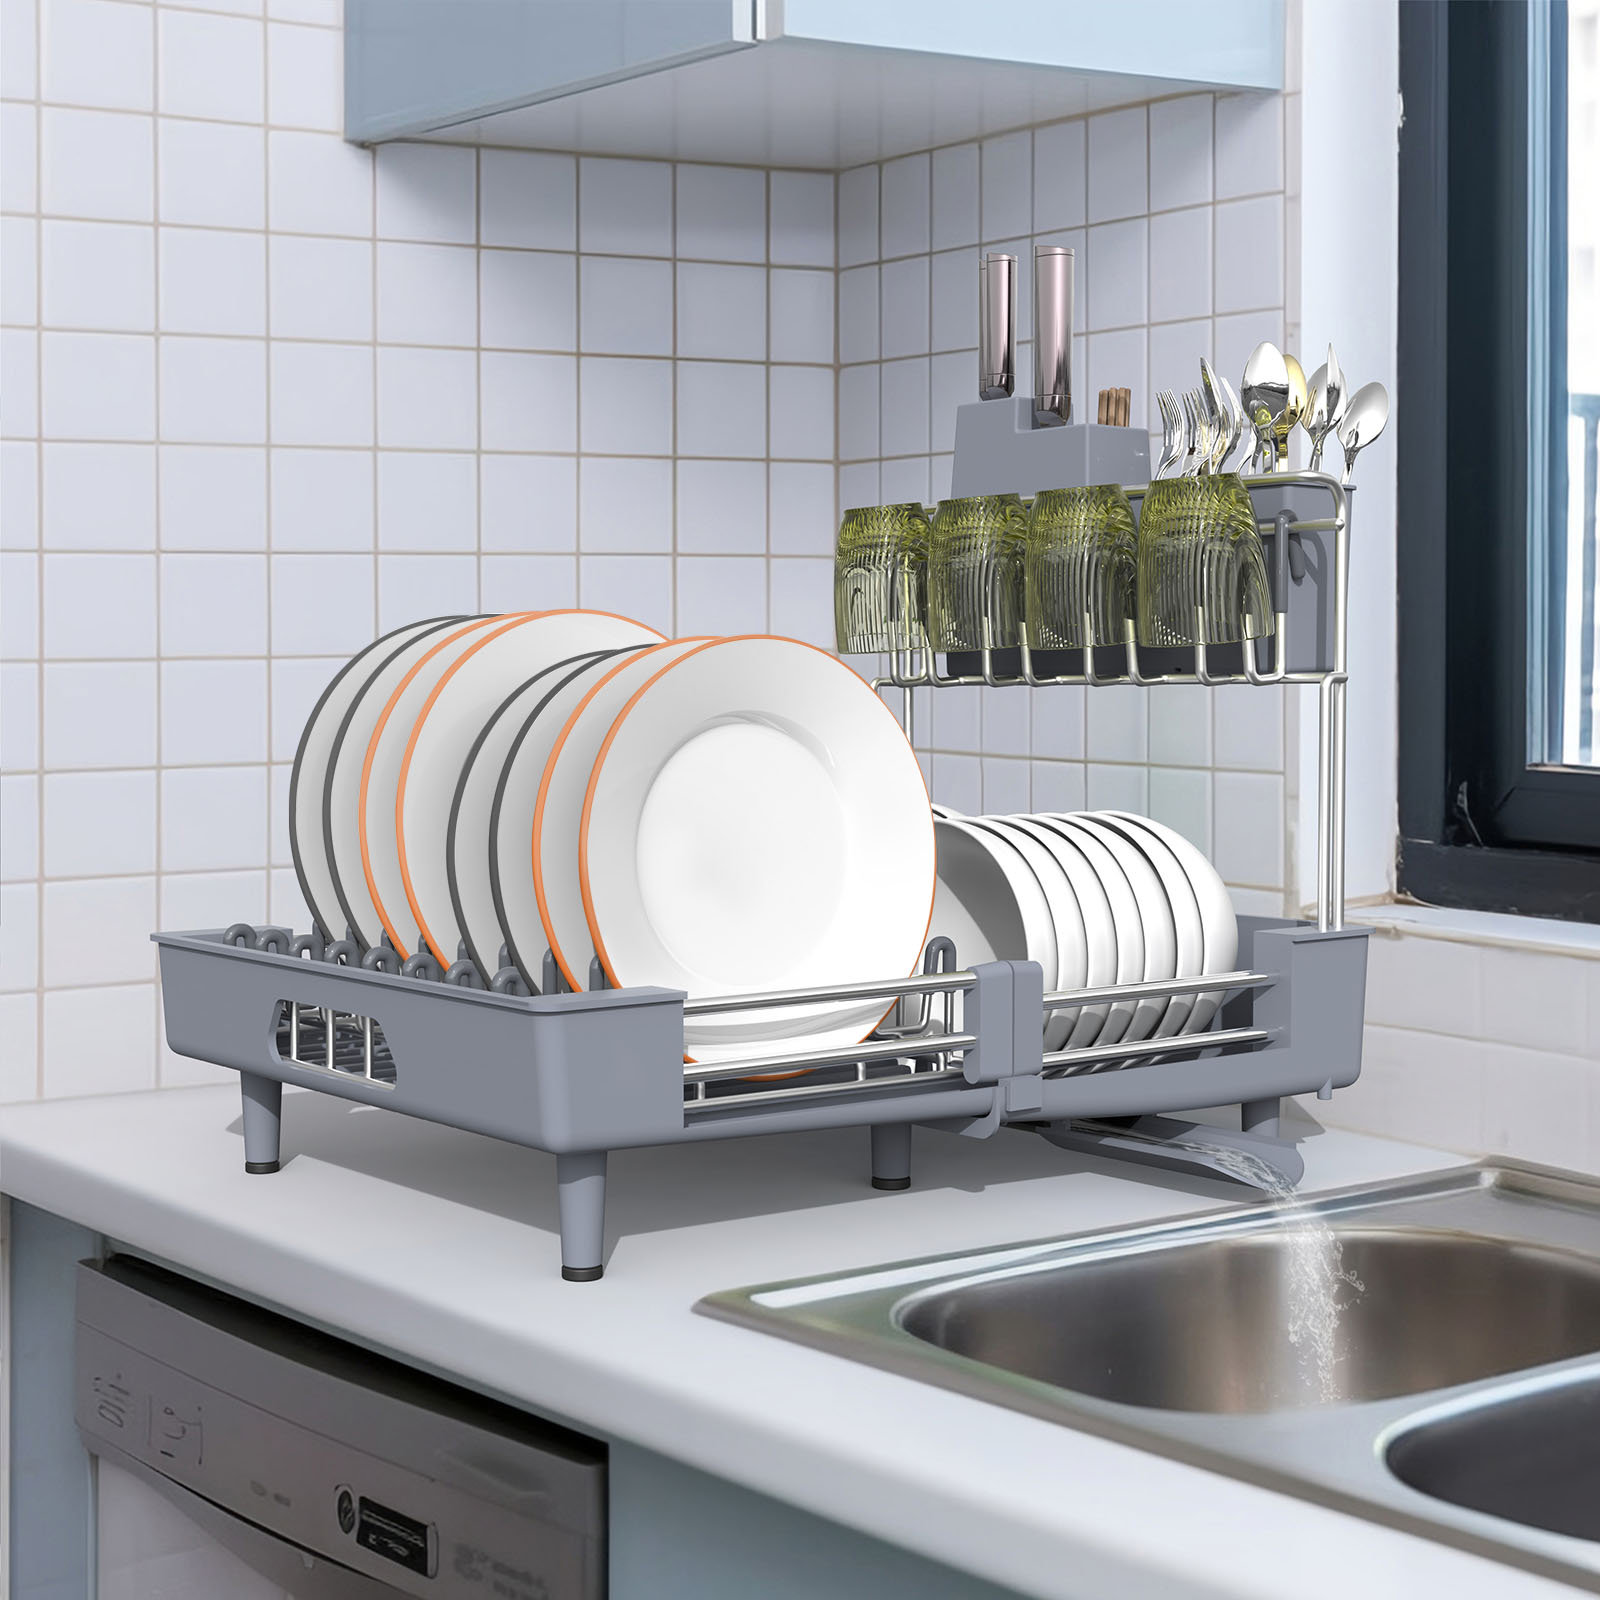 Multifunctional Kitchen Rack, Telescopic Design, Suitable To Store Bowls  And Dishes Over The Sink, Can Be Used As A Drain Rack